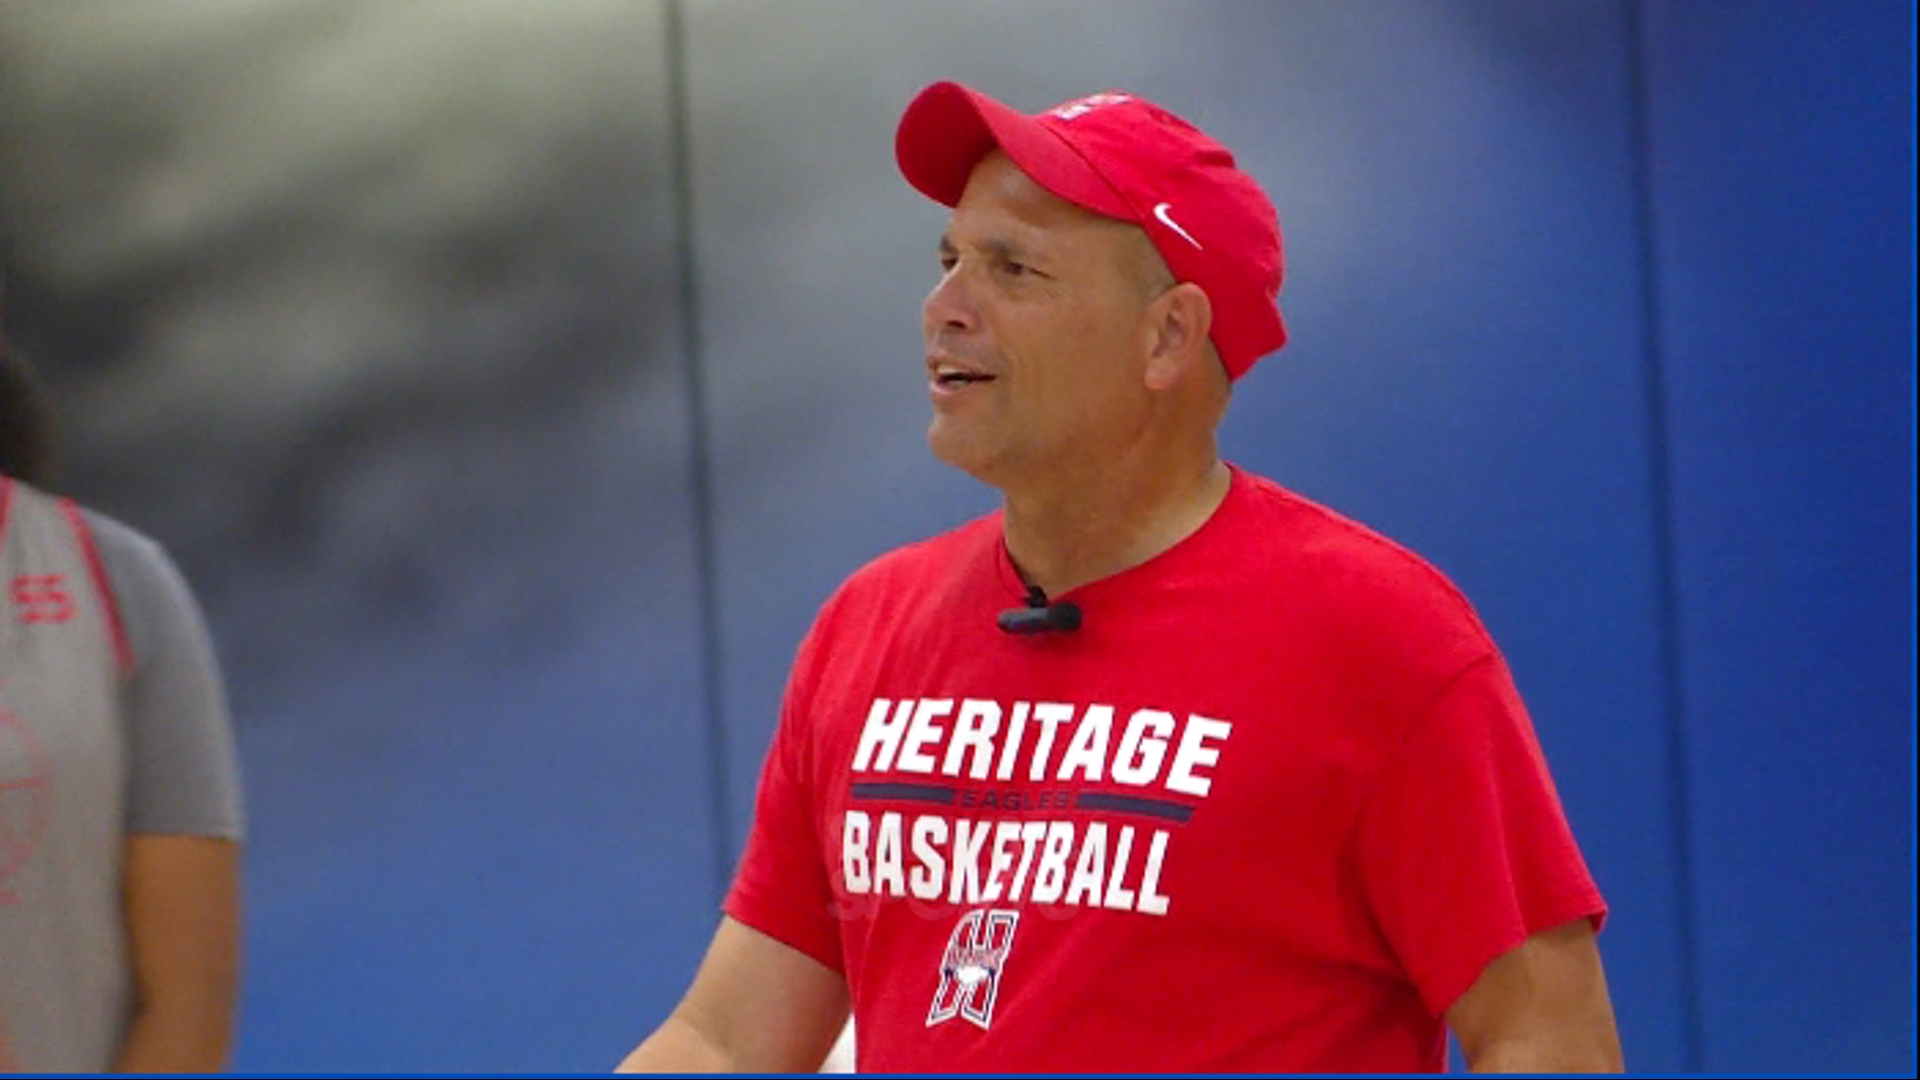 The new Heritage girls' basketball coach gave back to the community with a free basketball clinic